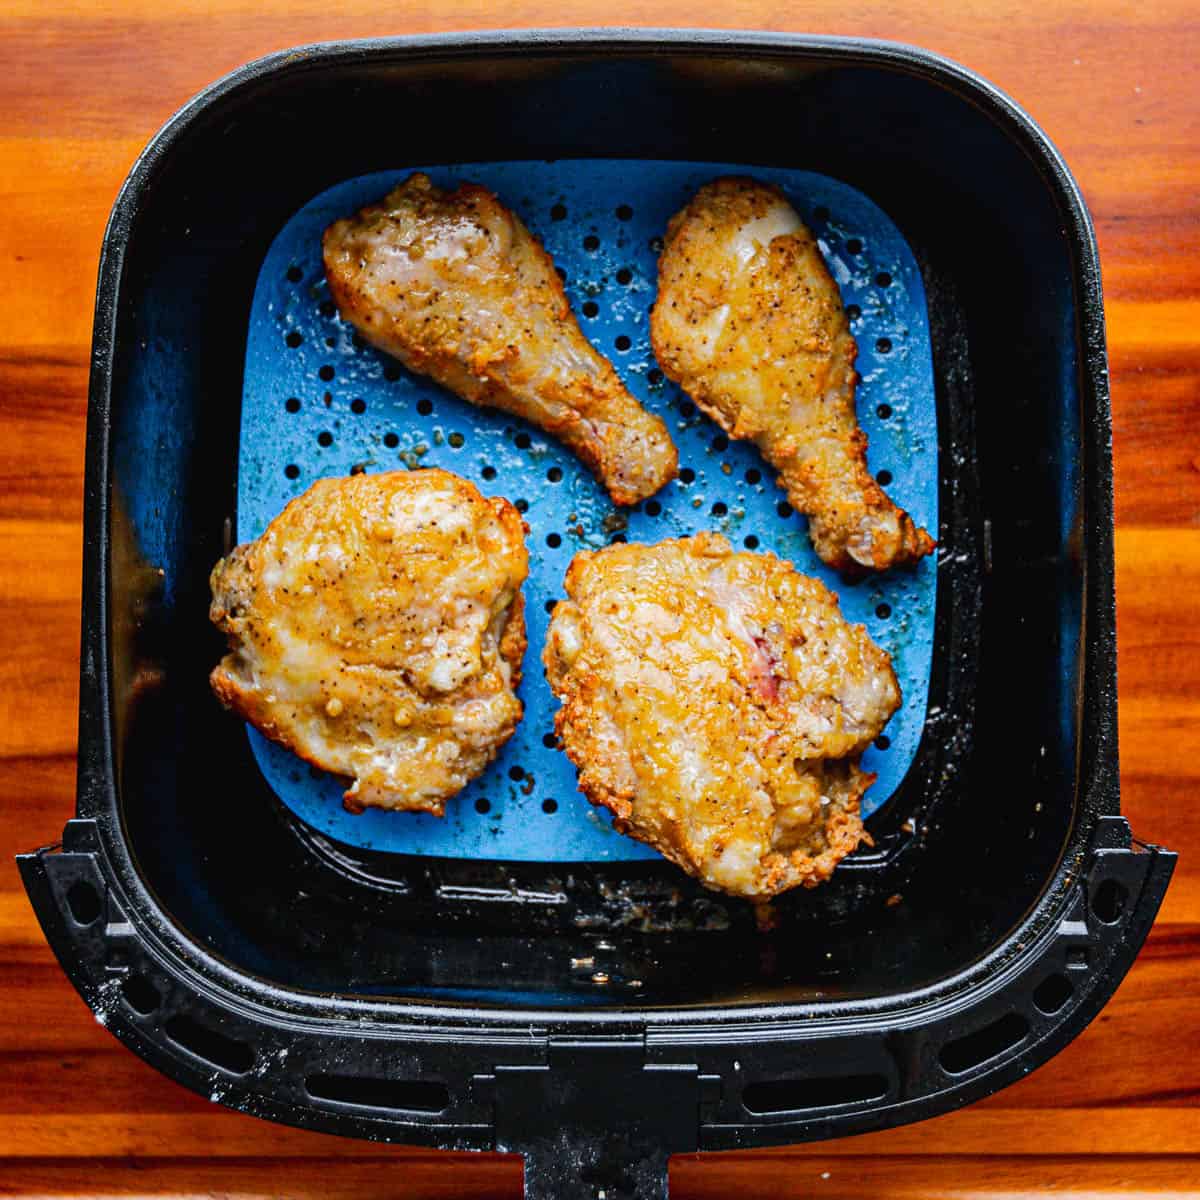 Now, let the air fryer work its magic for about 25 minutes or until the chicken is fully cooked.